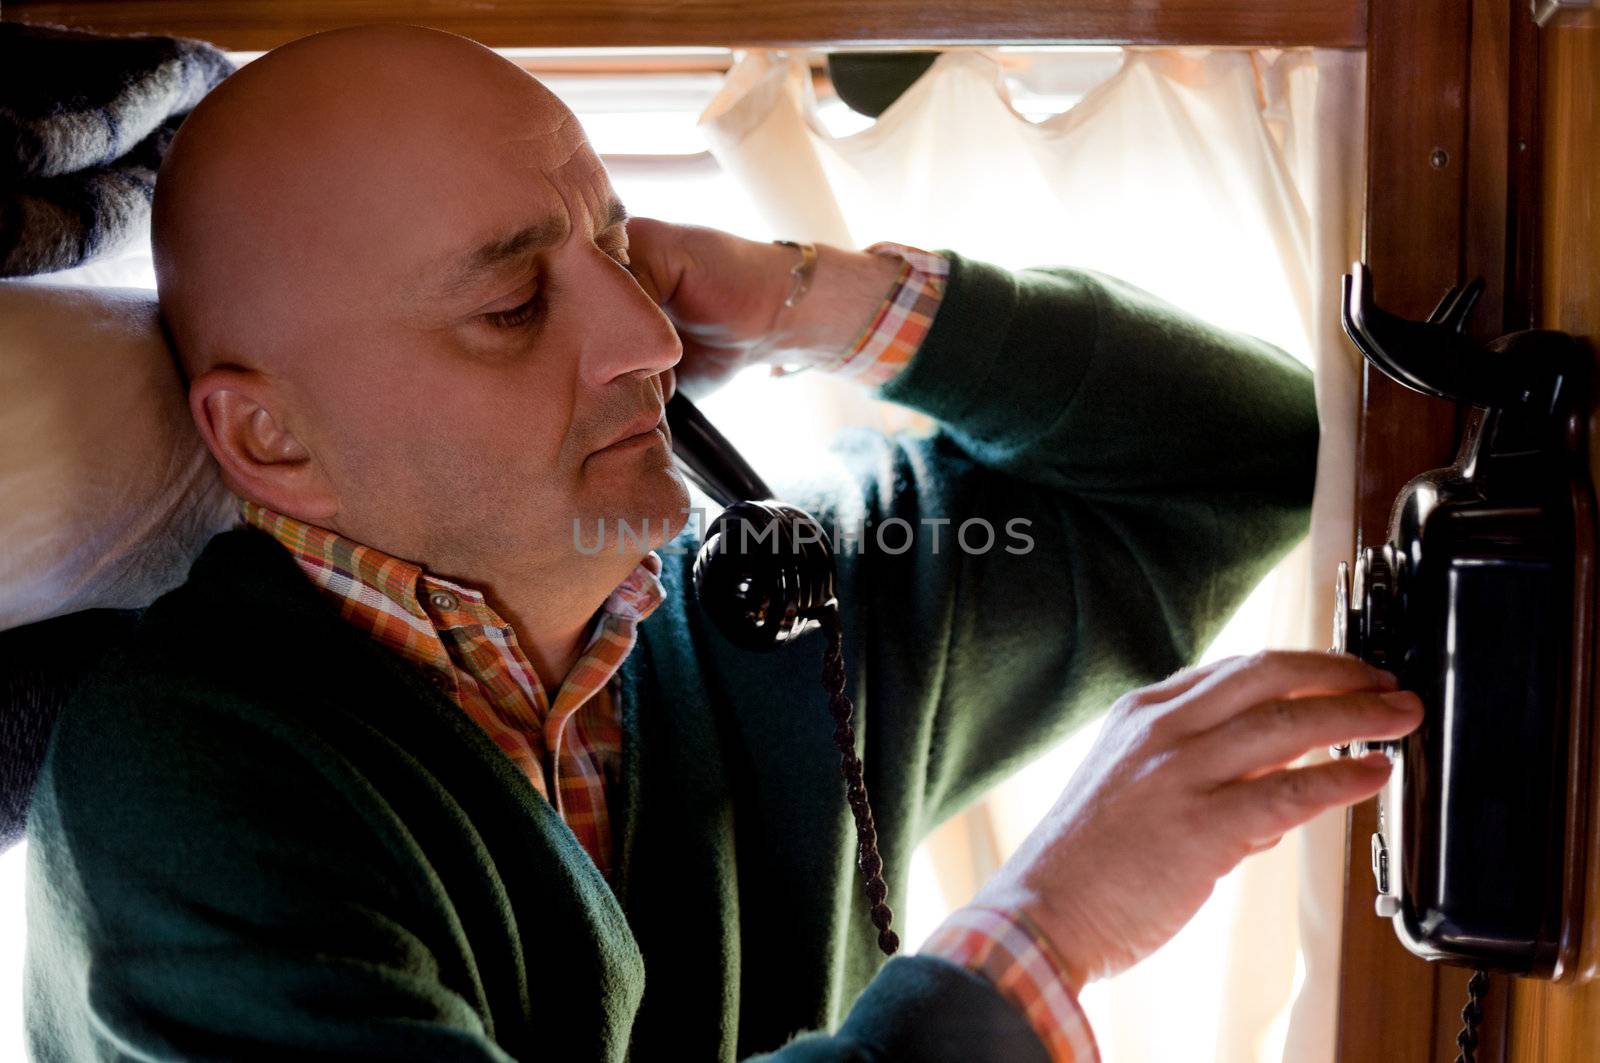 Man on the phone in train by vilevi